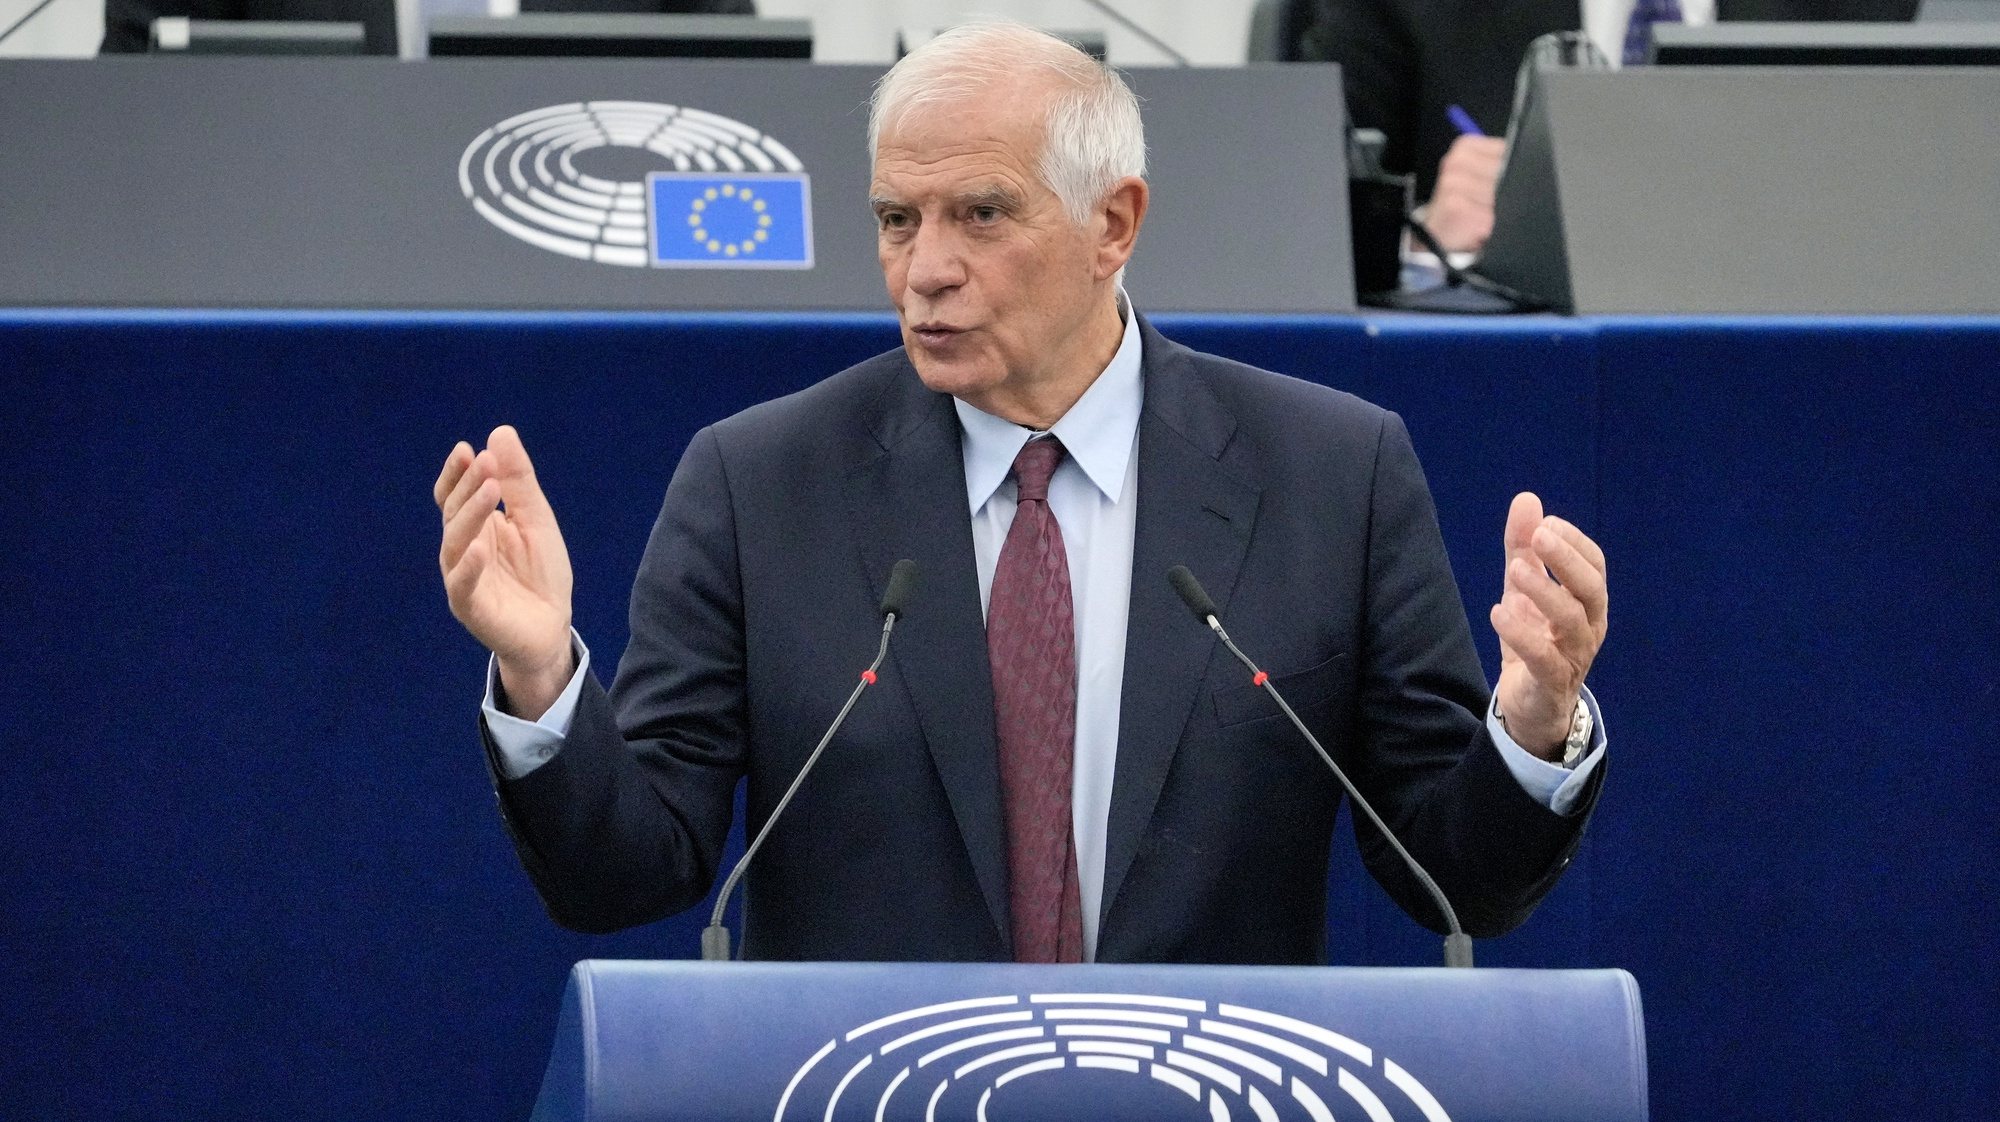 epa10989012 European Union High Representative for Foreign Affairs and Security Policy, Josep Borrell speaks during a Council and Commission statement at the European Parliament in Strasbourg, France, 22 November 2023. The Council and Commission statements&#039; debate focused on the humanitarian situation in Gaza, the need for release of hostages held by Hamas, and for an immediate humanitarian truce leading to a ceasefire and the prospects for peace and security in the Middle East. The EU Parliament plenary session runs from 20 until 23 November 2023.  EPA/RONALD WITTEK